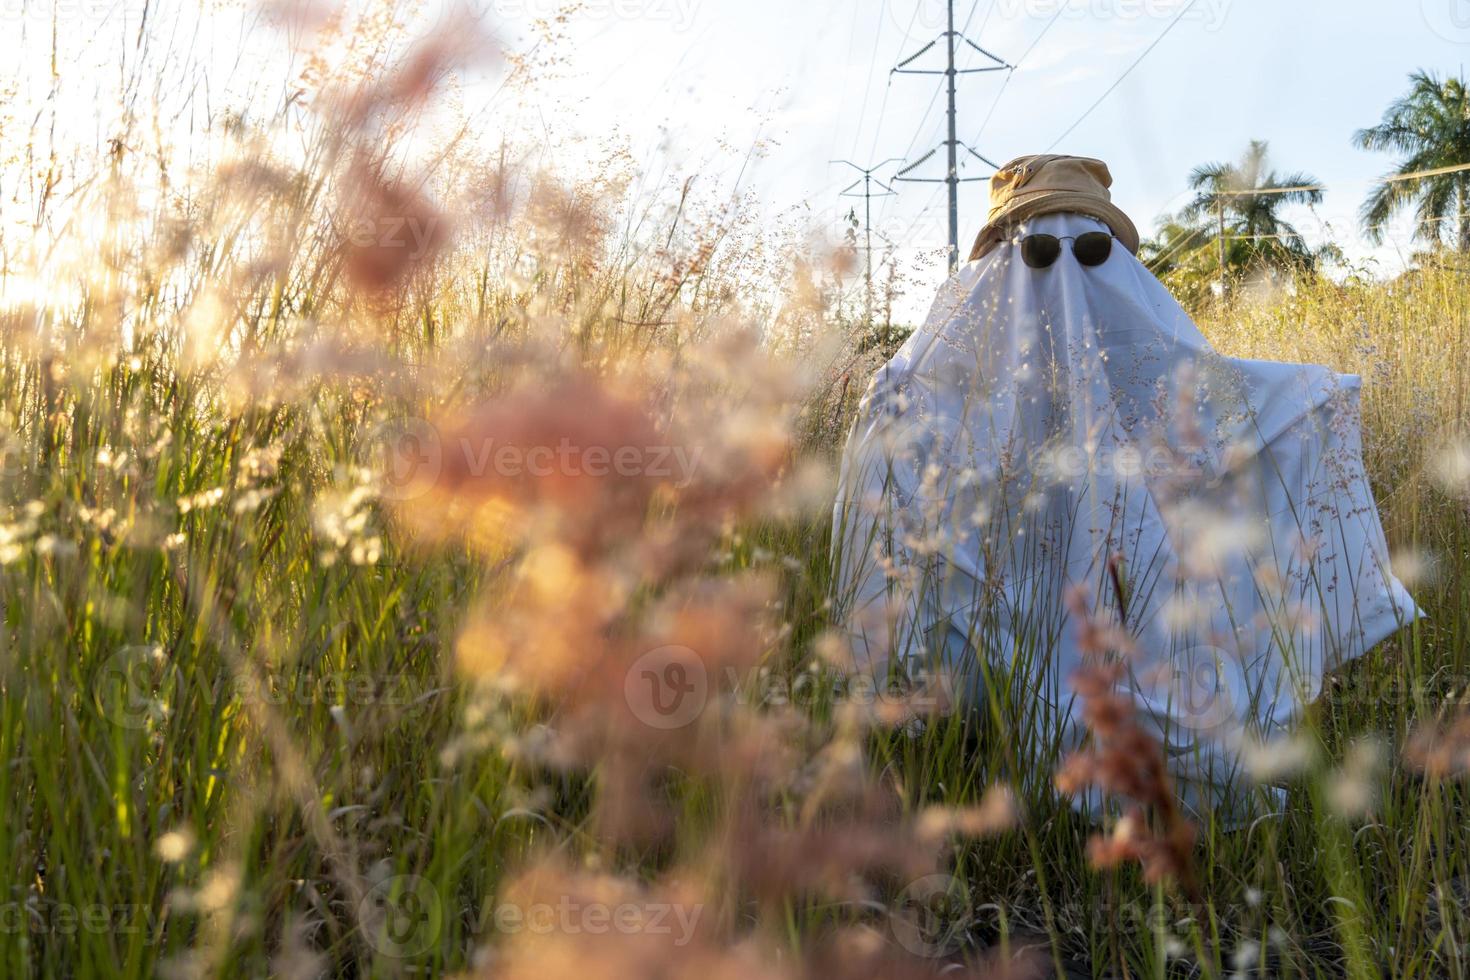 ghost in the countryside enjoying the sun and the train passing behind, train tracks photo